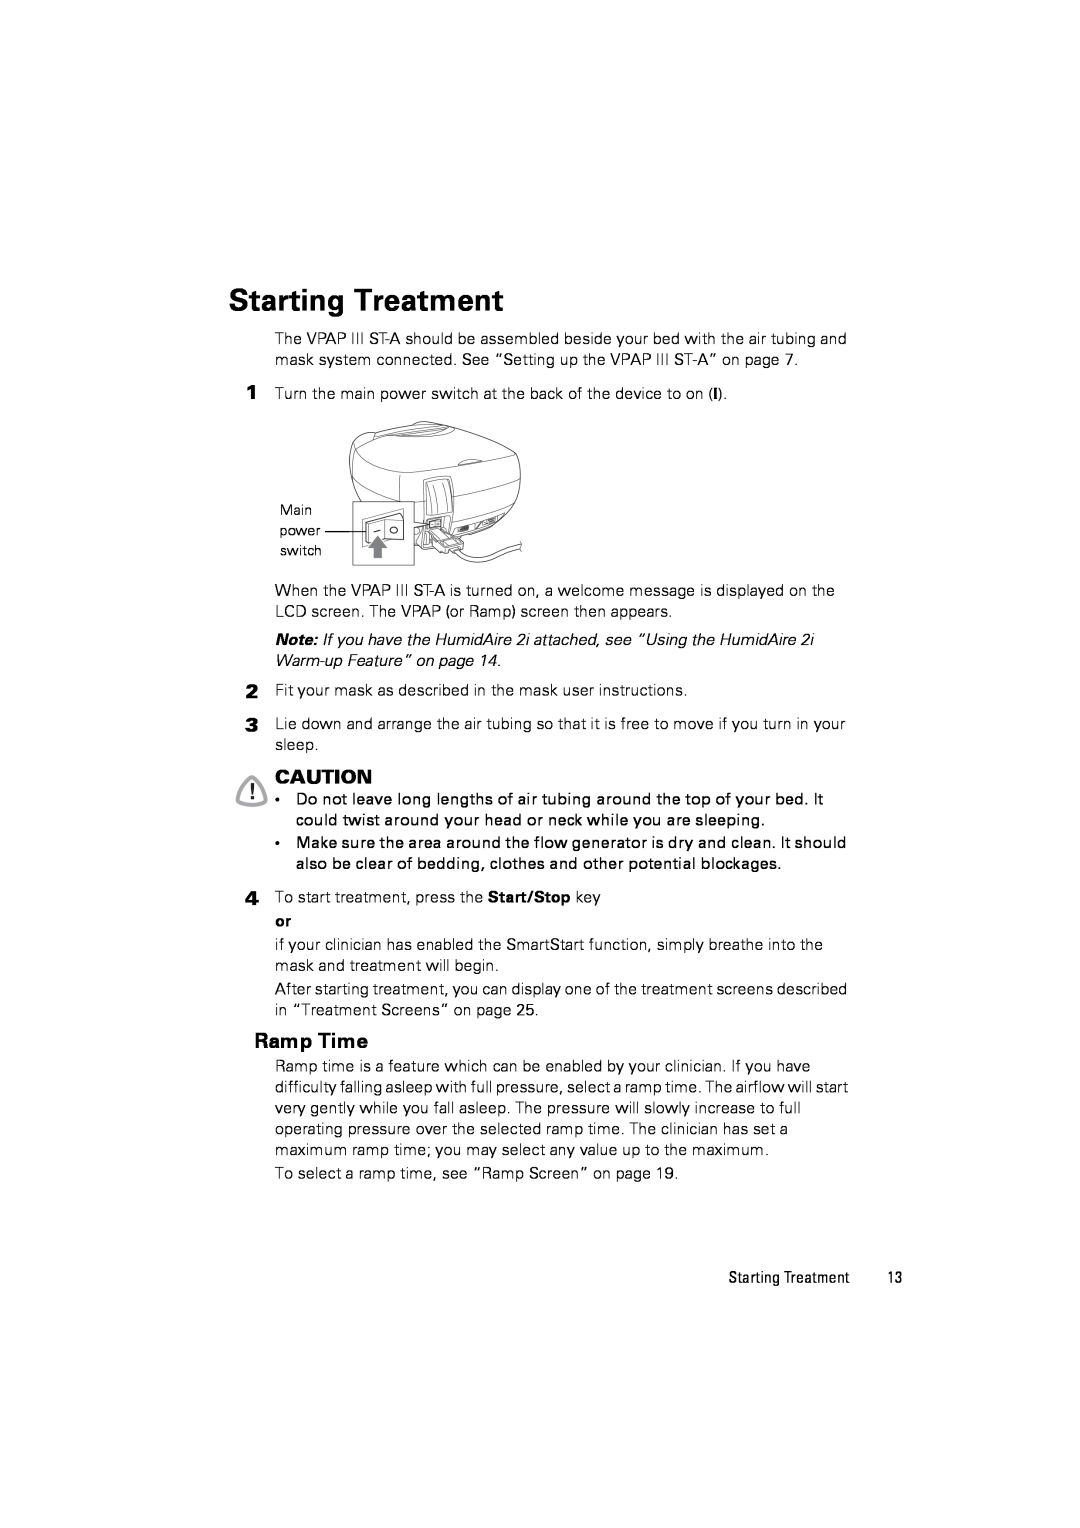 ResMed III ST-A user manual Starting Treatment, Ramp Time 